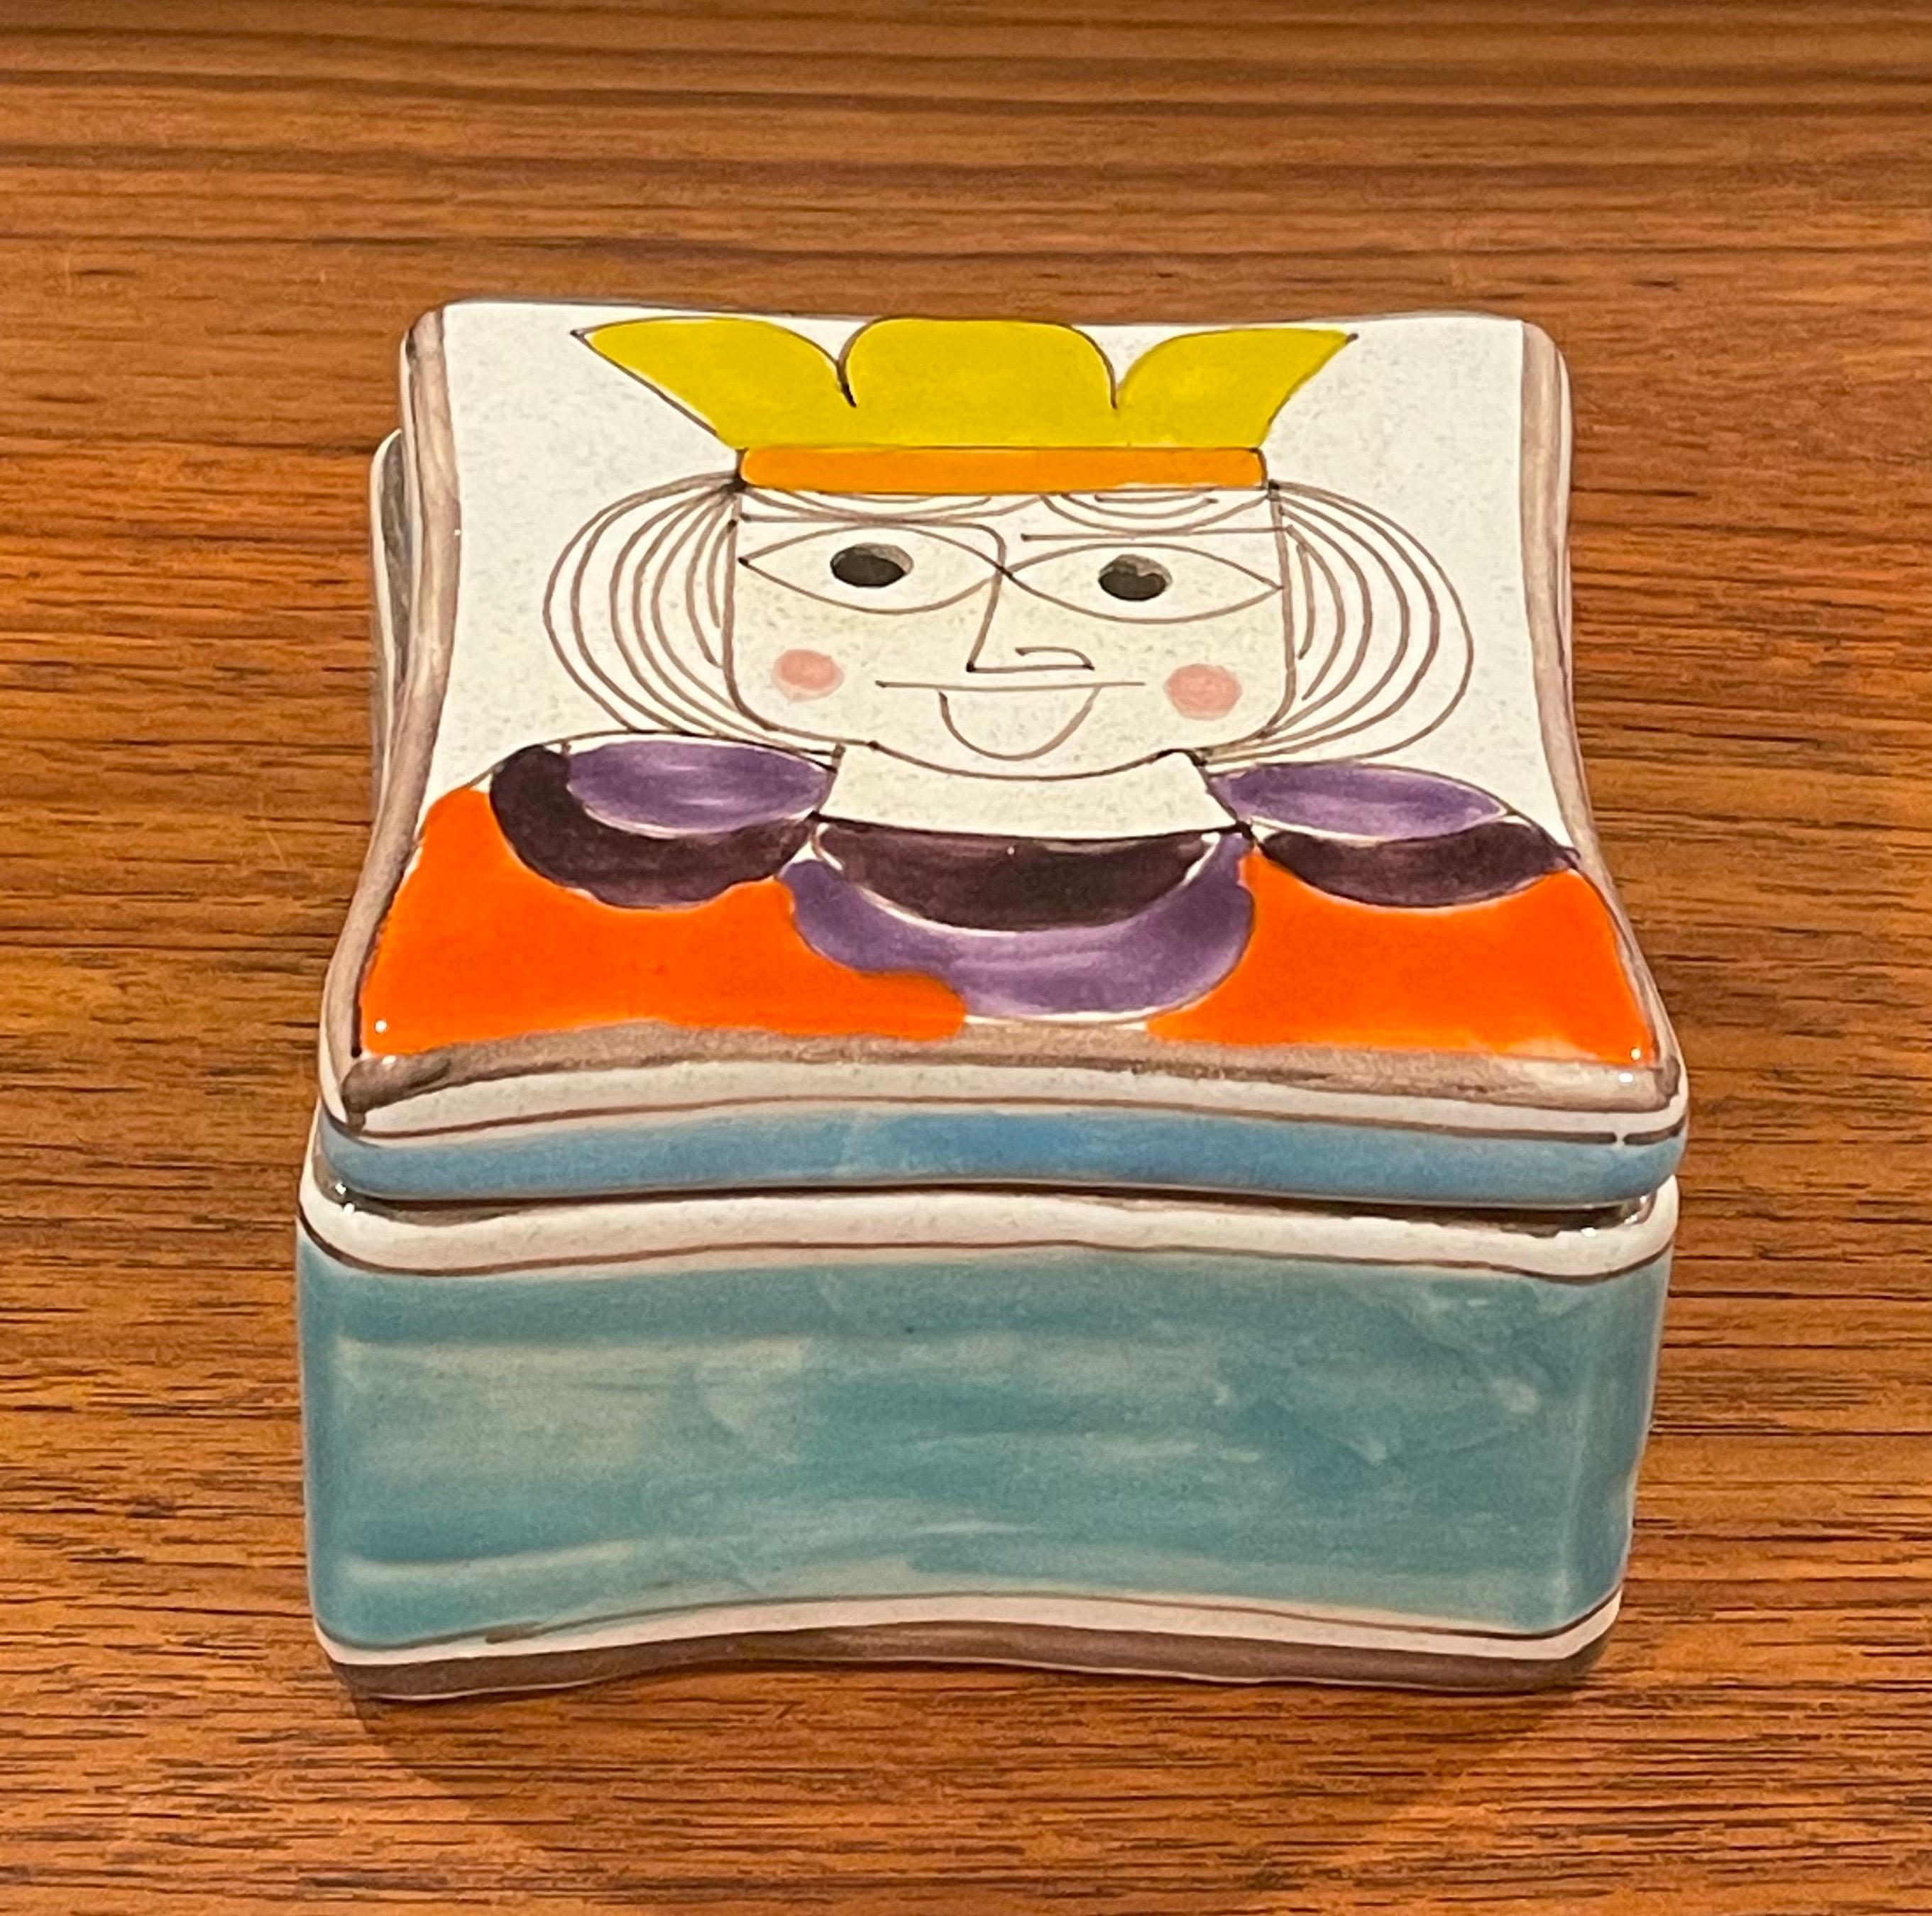 Pottery Mid-Century Modern Hand Painted Ceramic Trinket Box by Giovanni Desimone For Sale